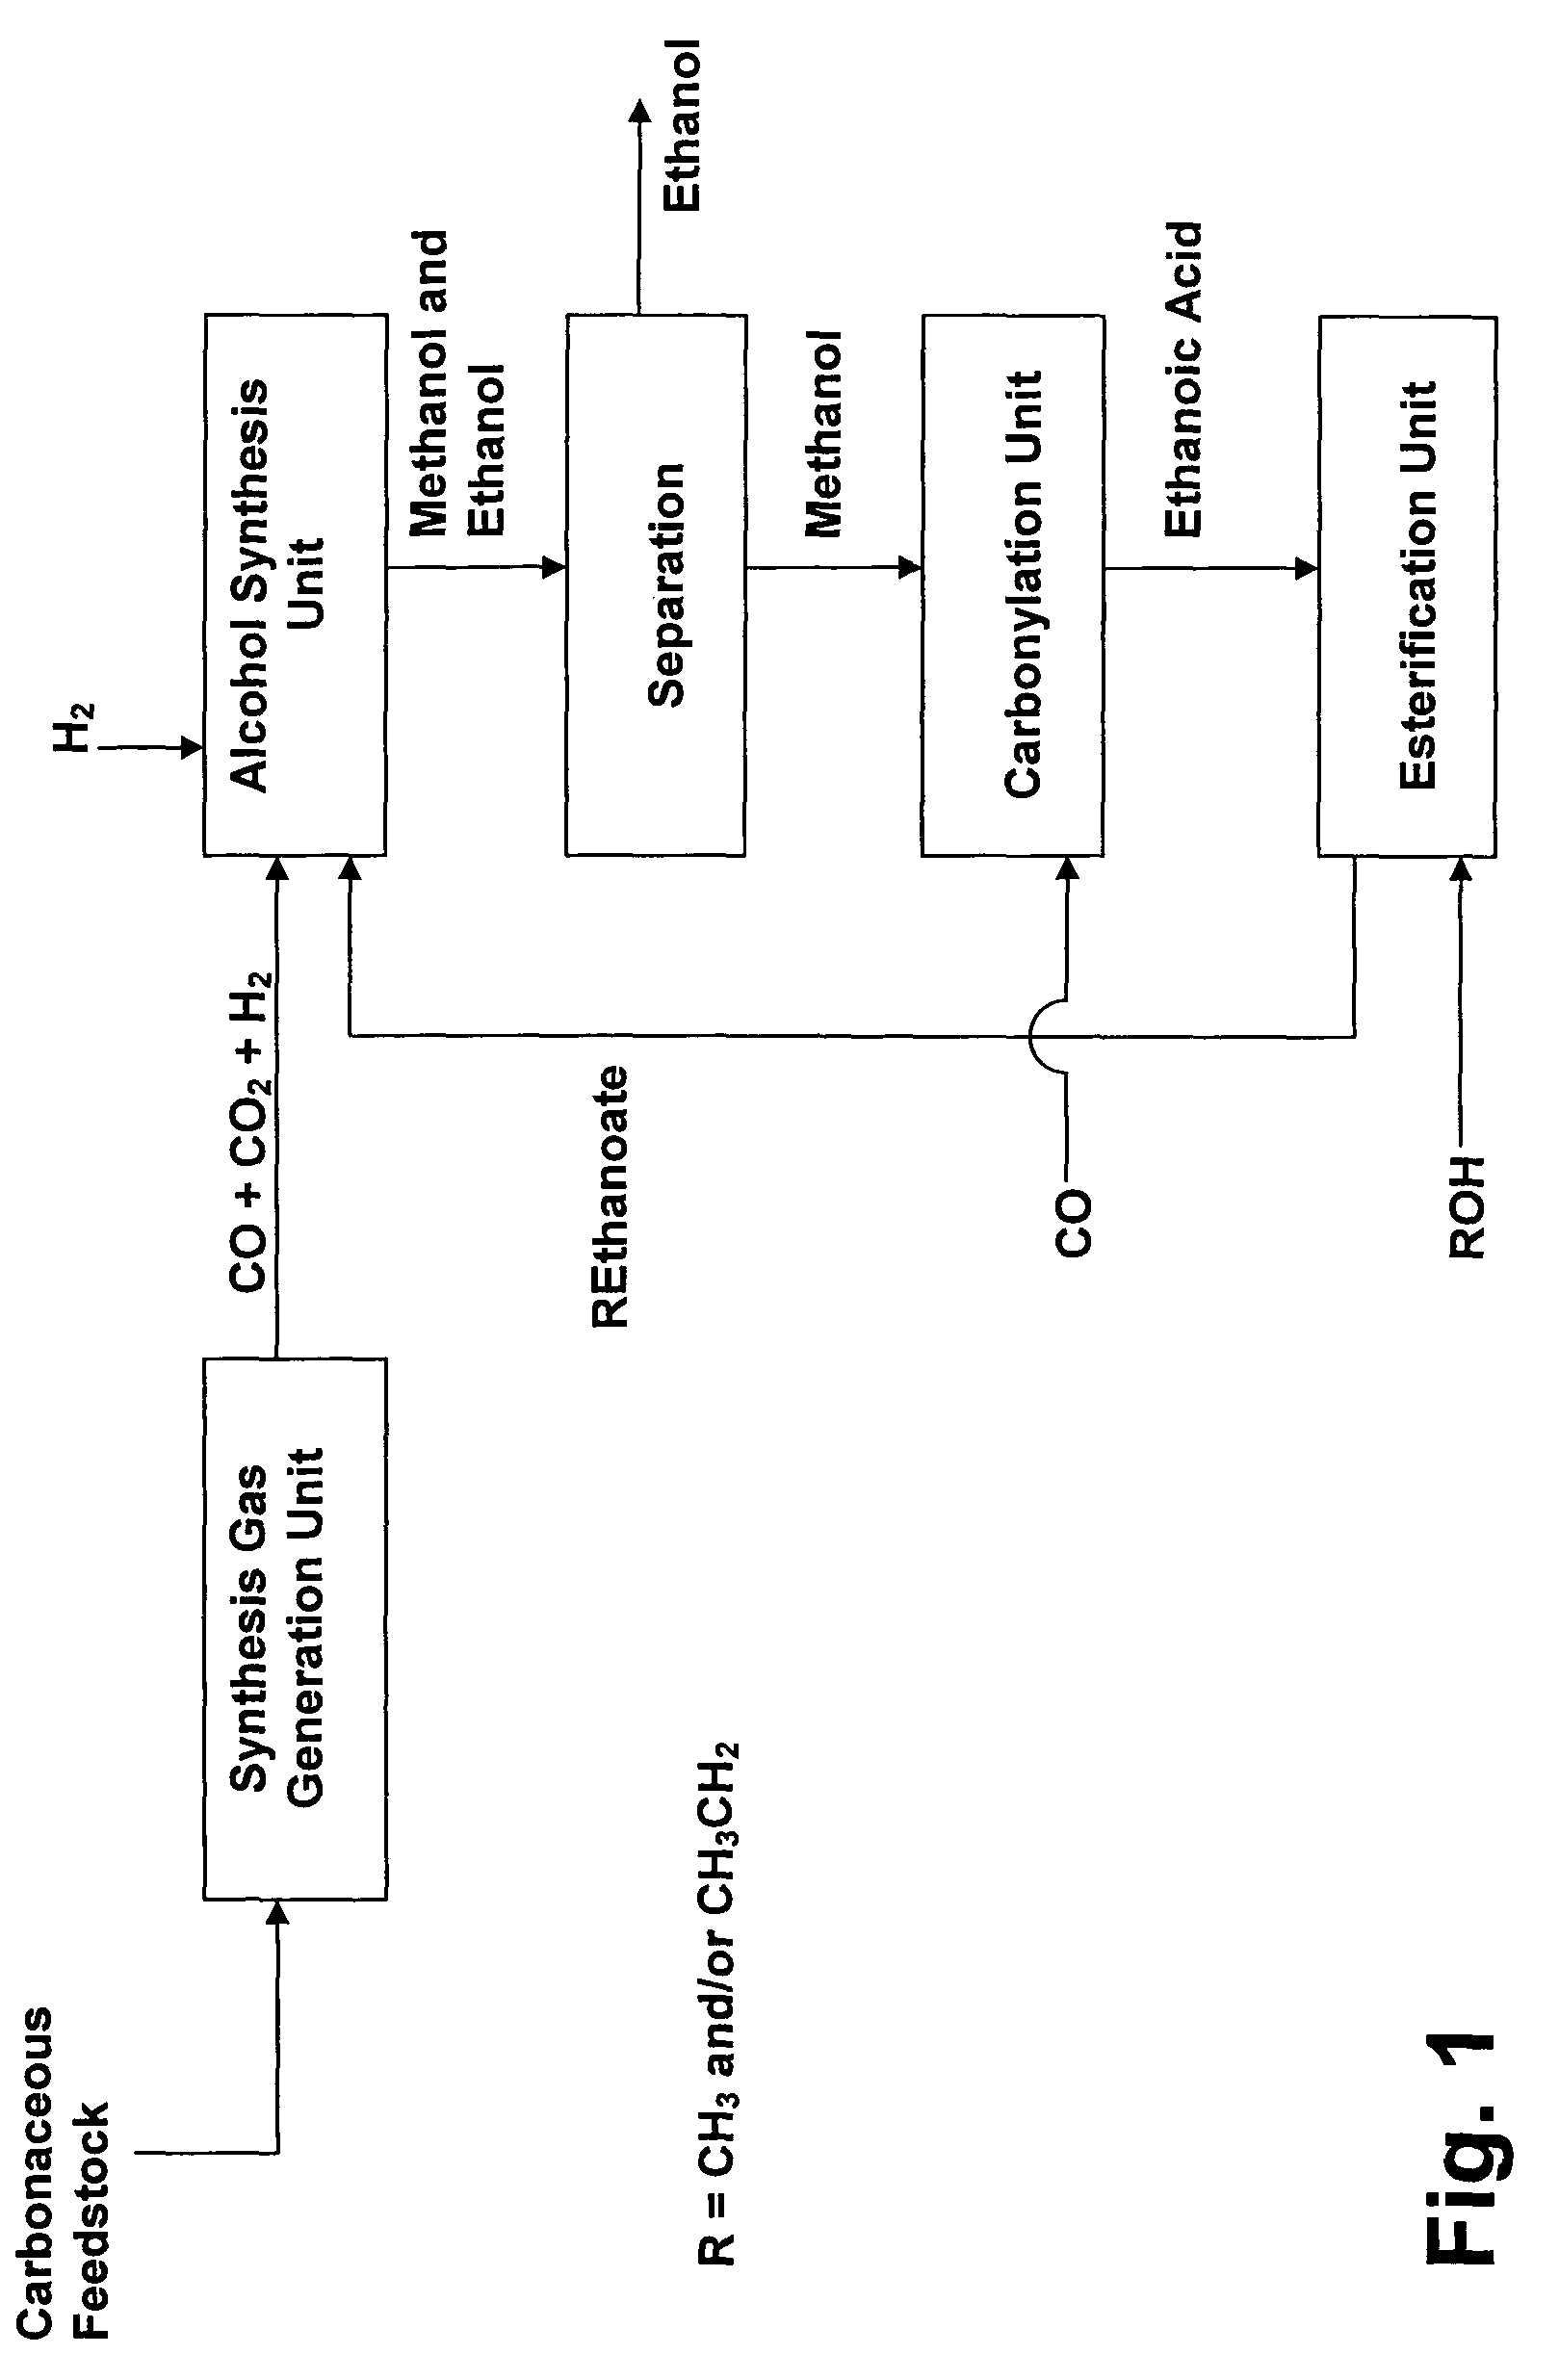 Process for the conversion of hydrocarbons into ethanol